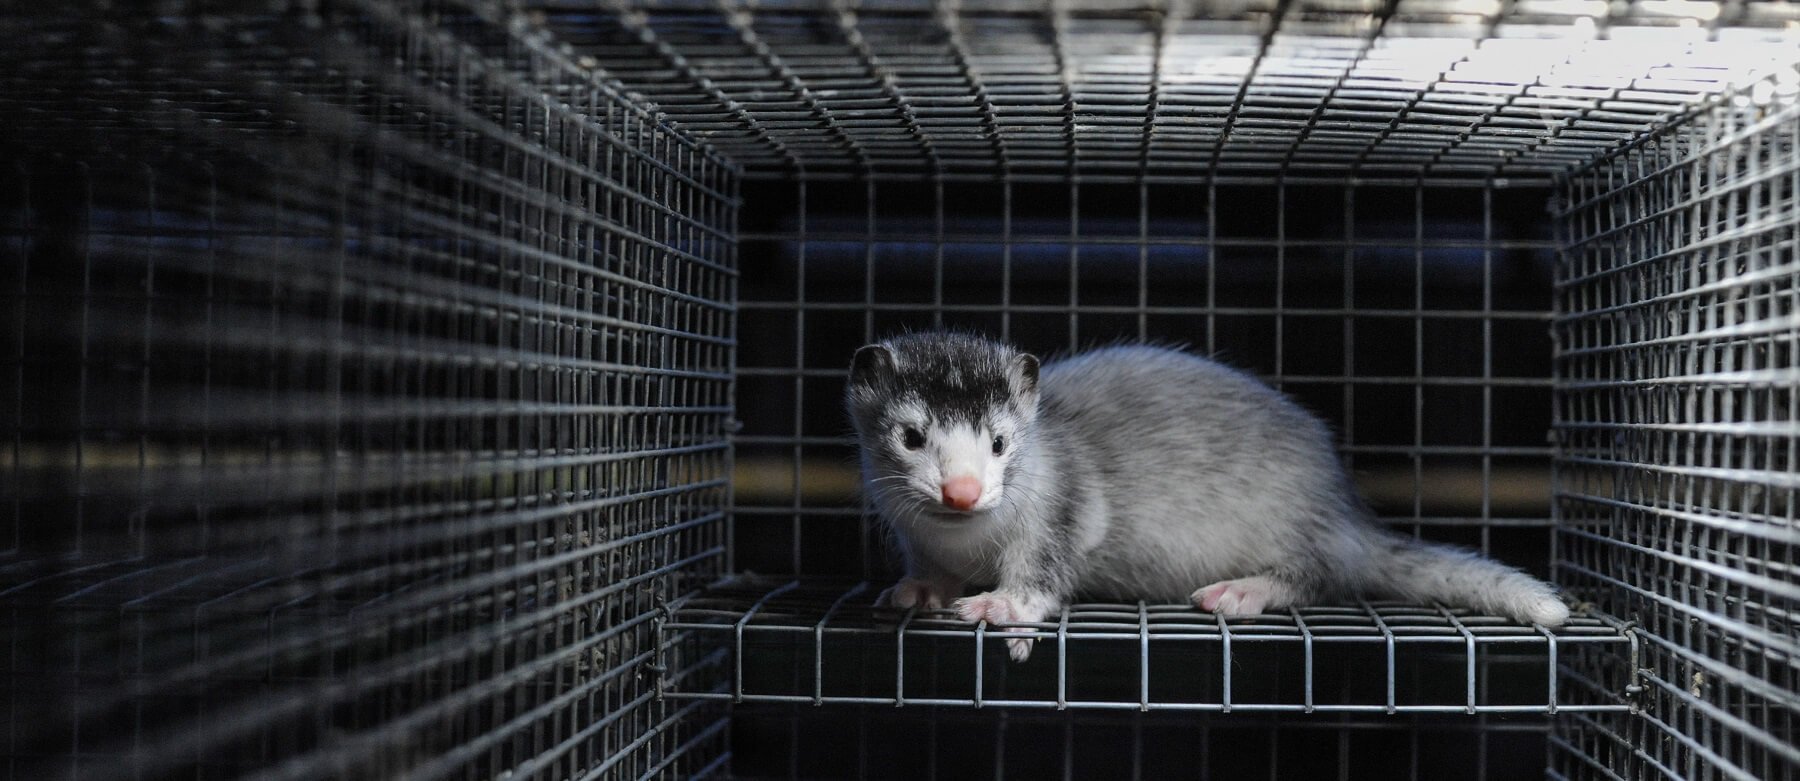  A mink in a cage on a mink farm.